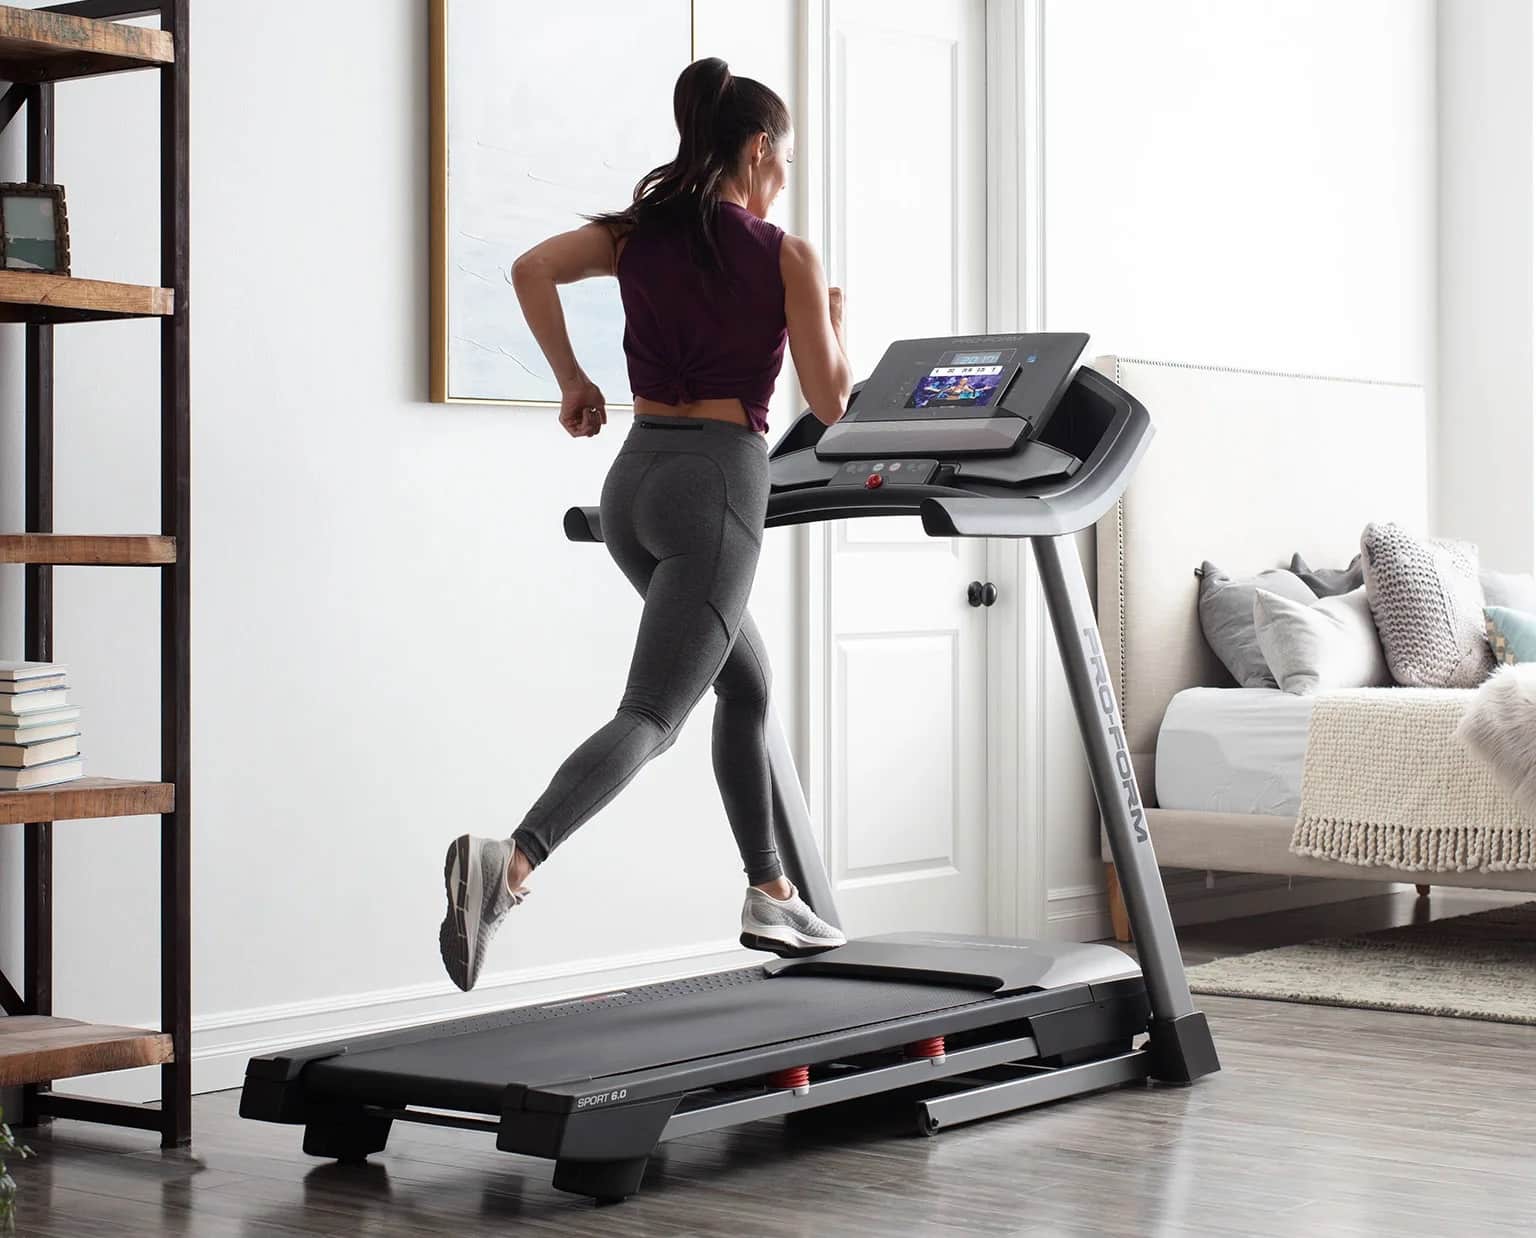 Proform Sport 6.0 folding treadmill - with a female model running on the machine